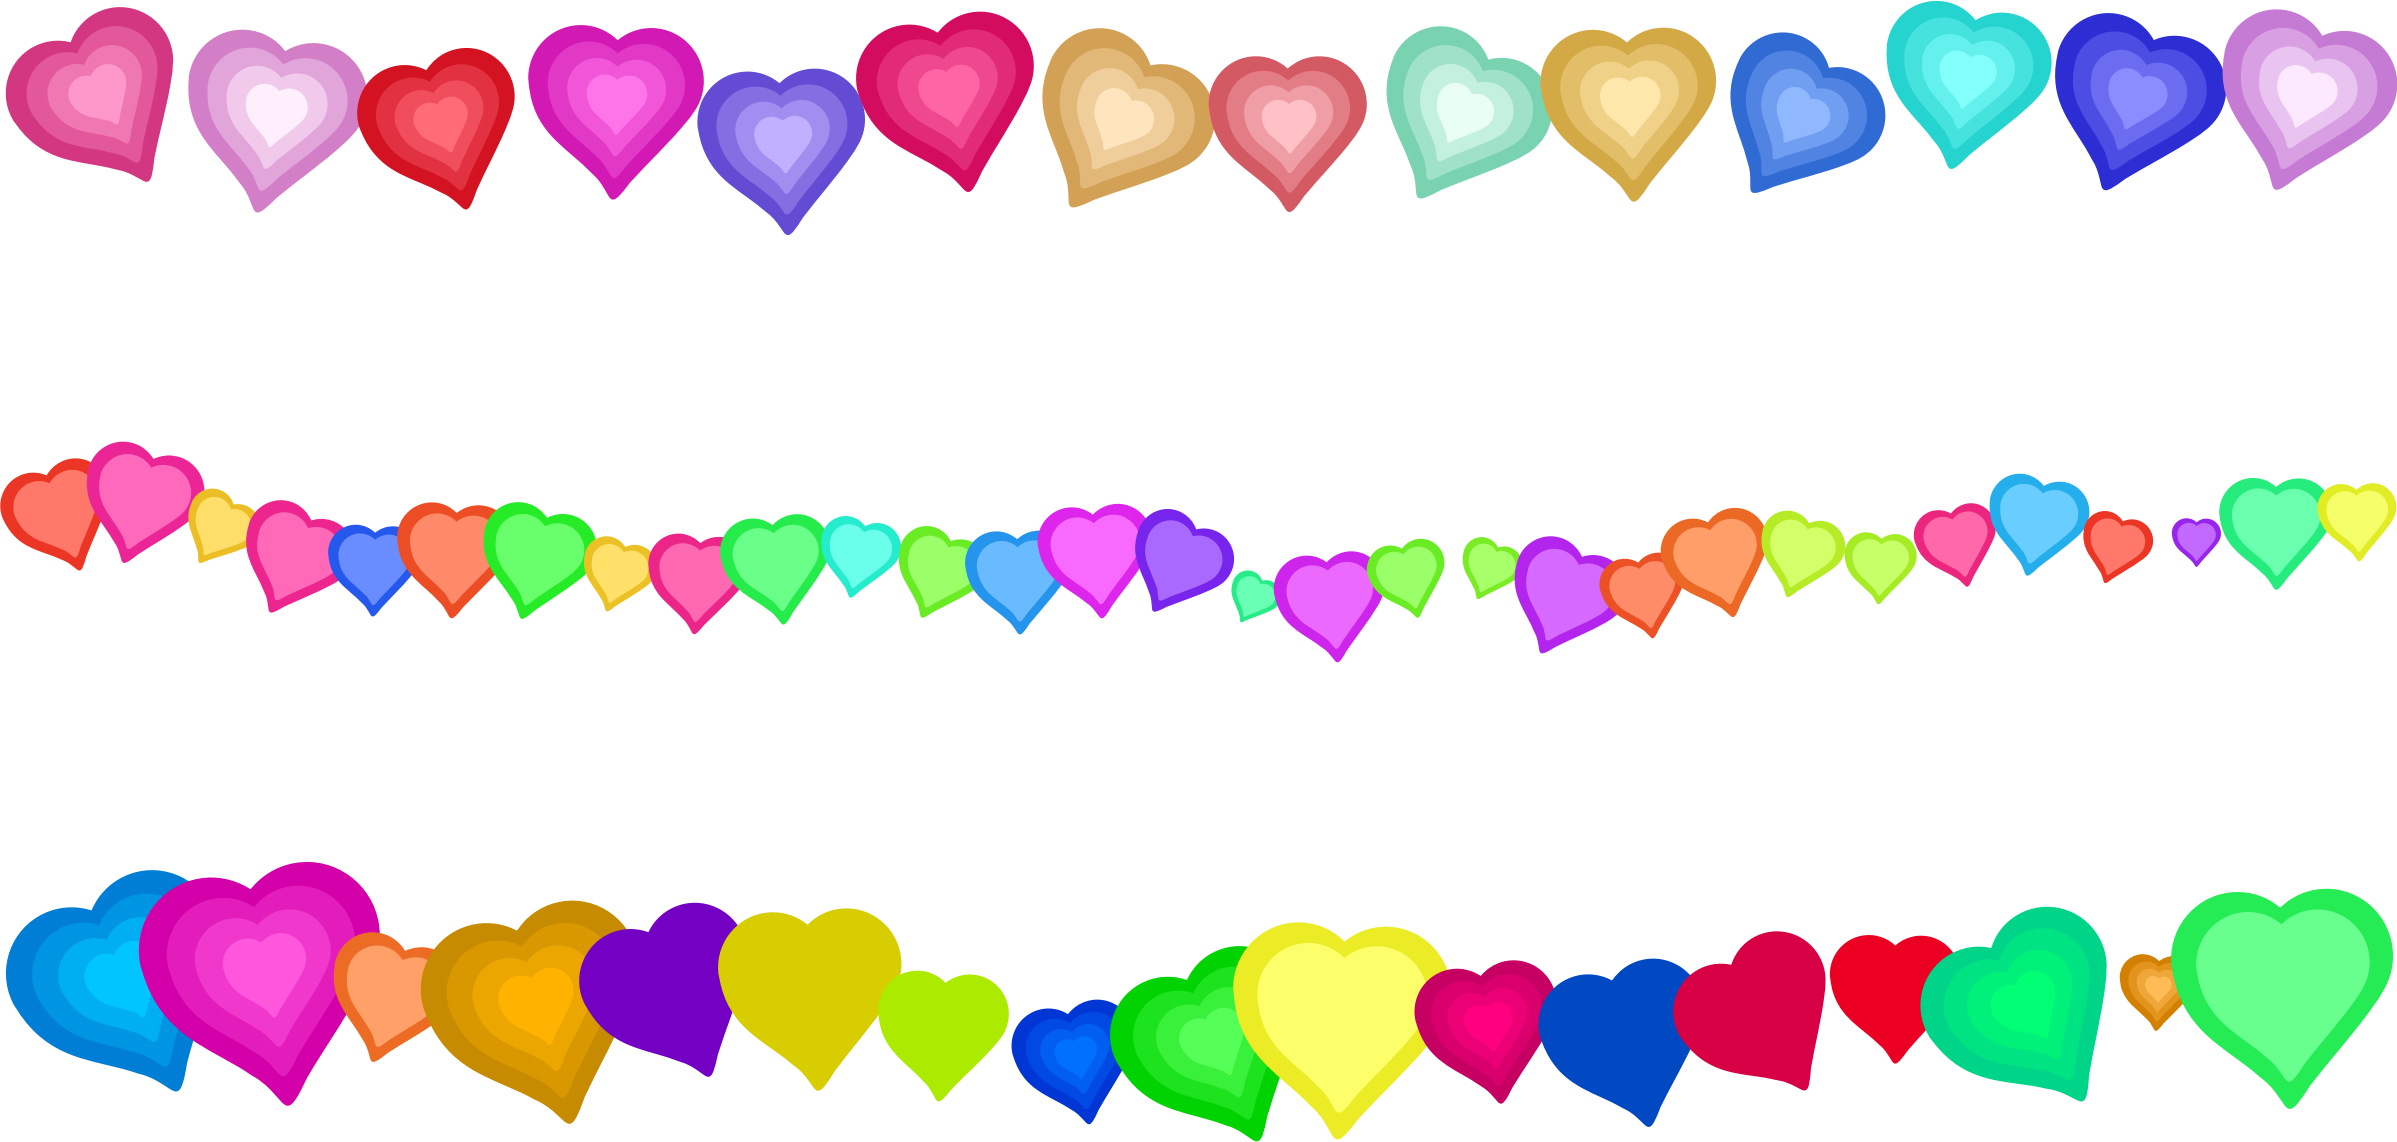 Clip Arts Related To - Heart Border (2397x1142)